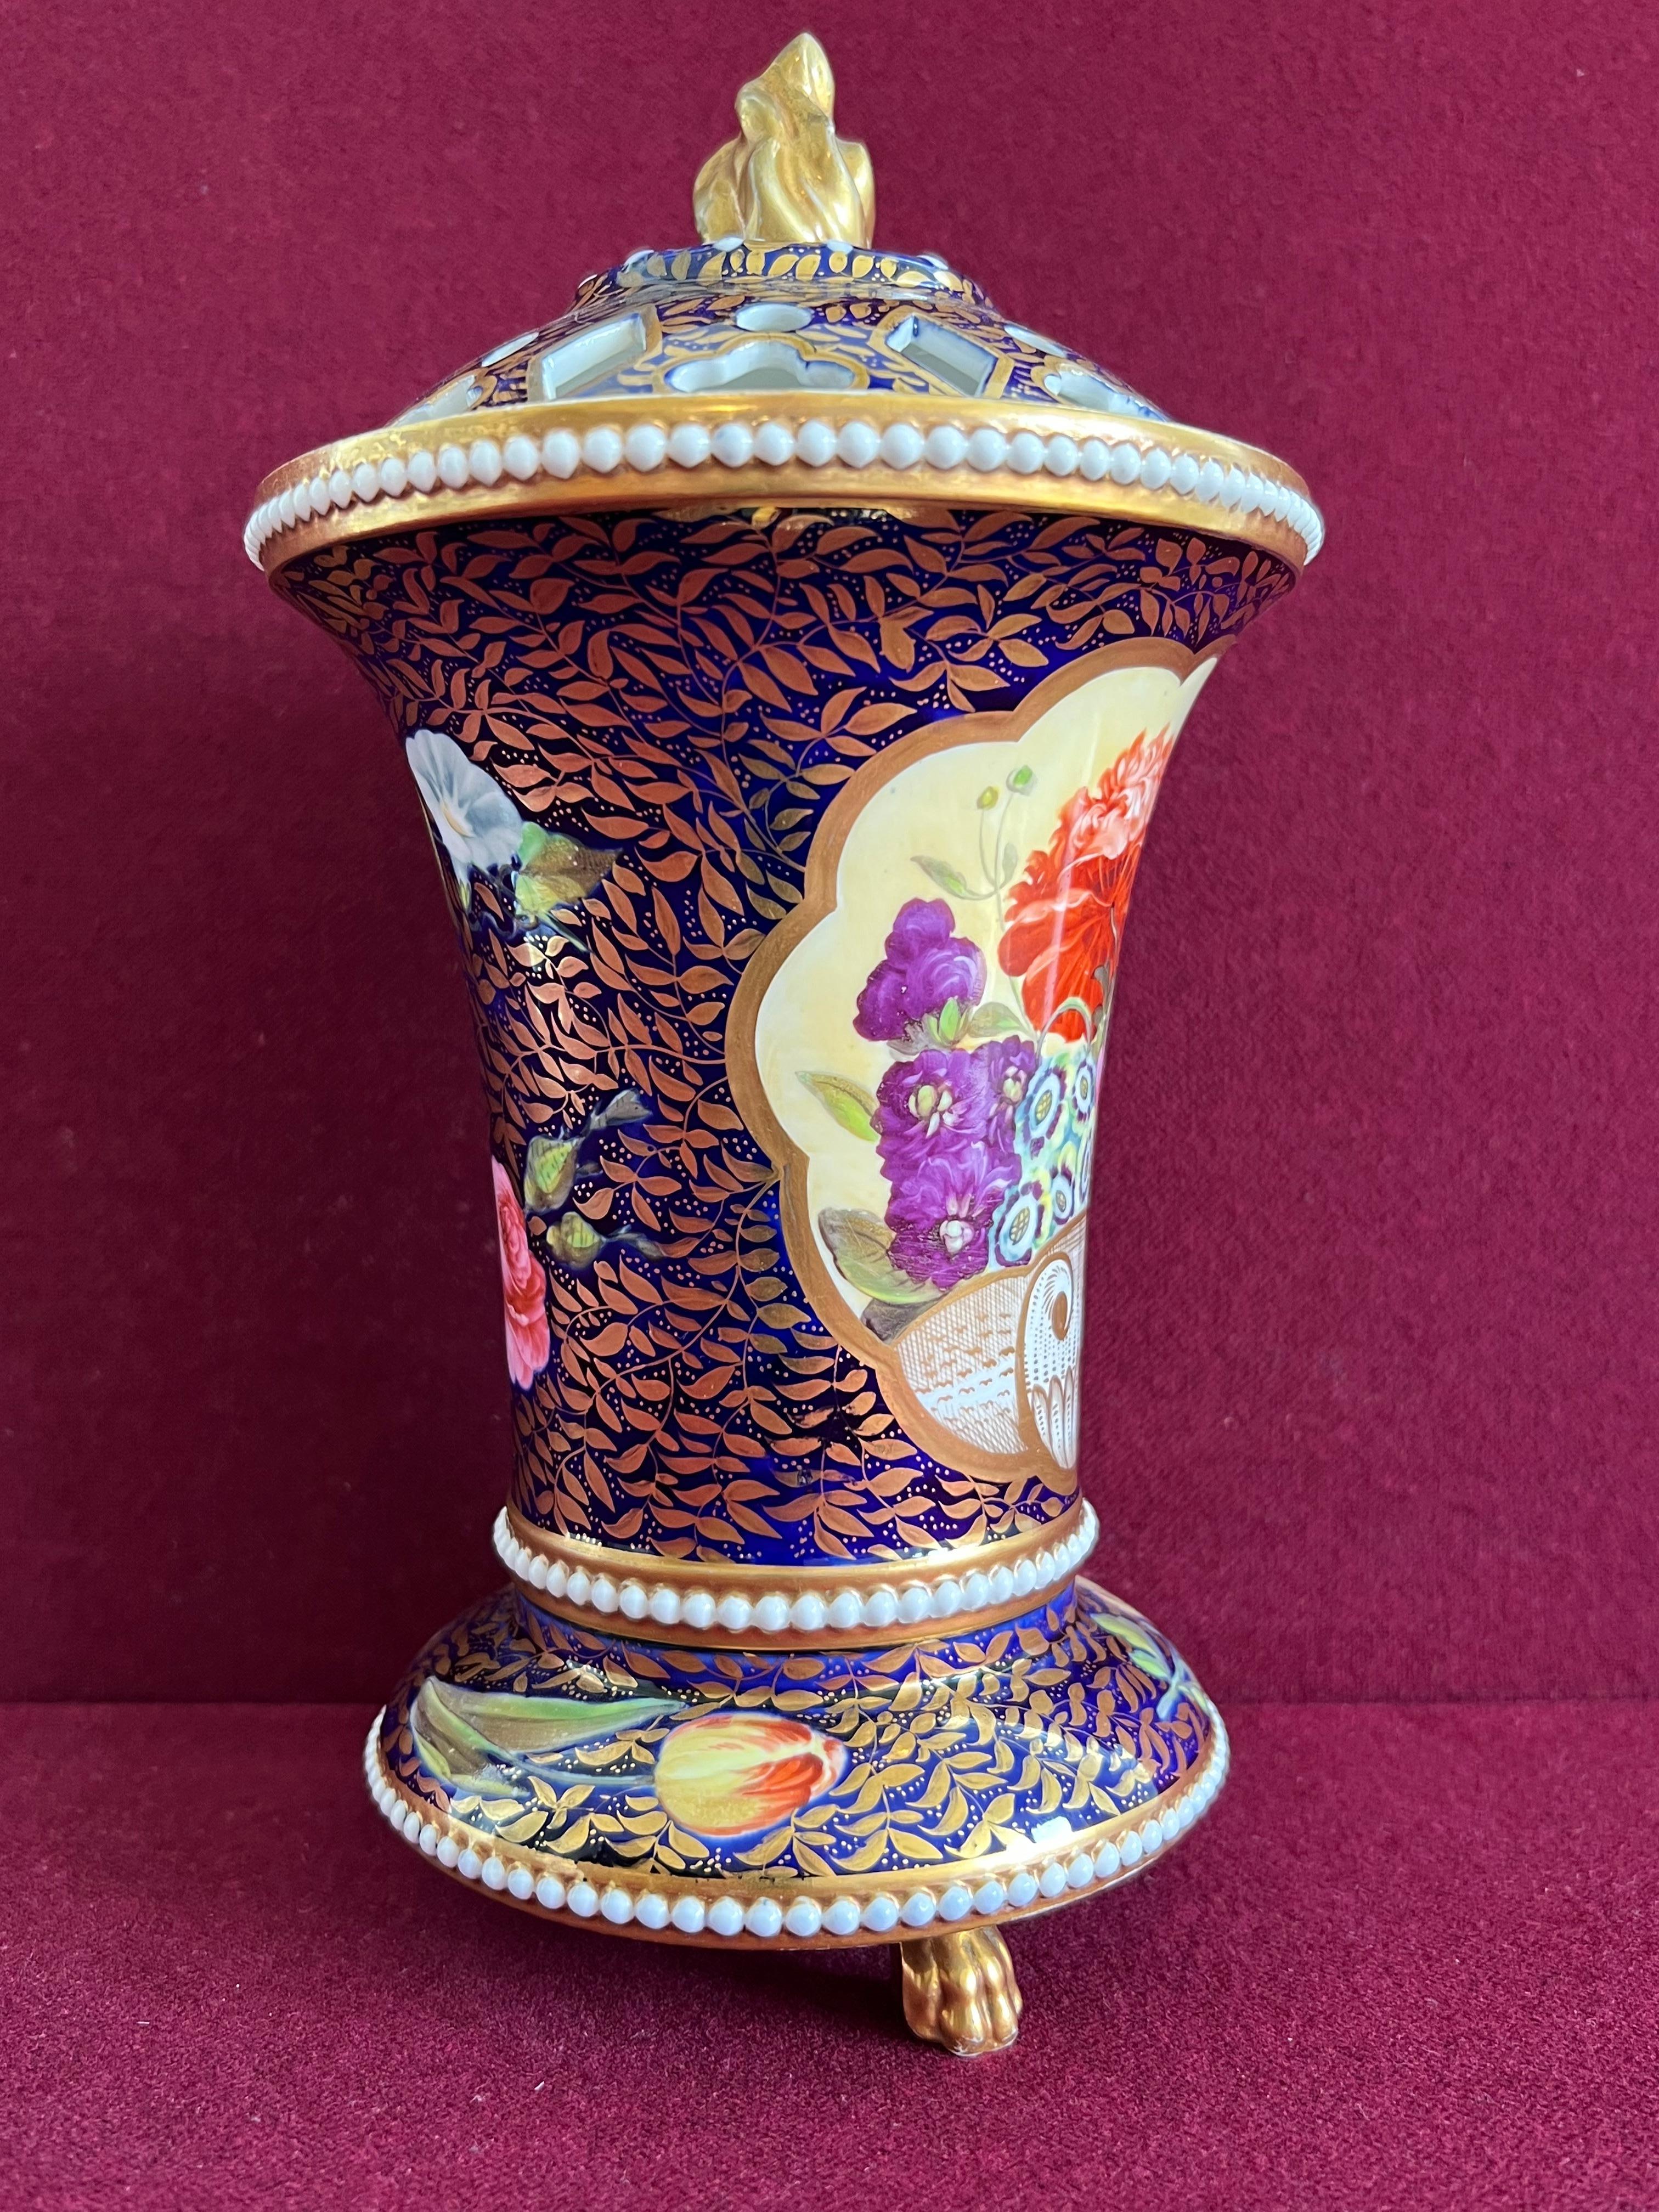 Spode Porcelain Beaded Pot Pourri Vase C.1820-1825 In Good Condition For Sale In Exeter, GB